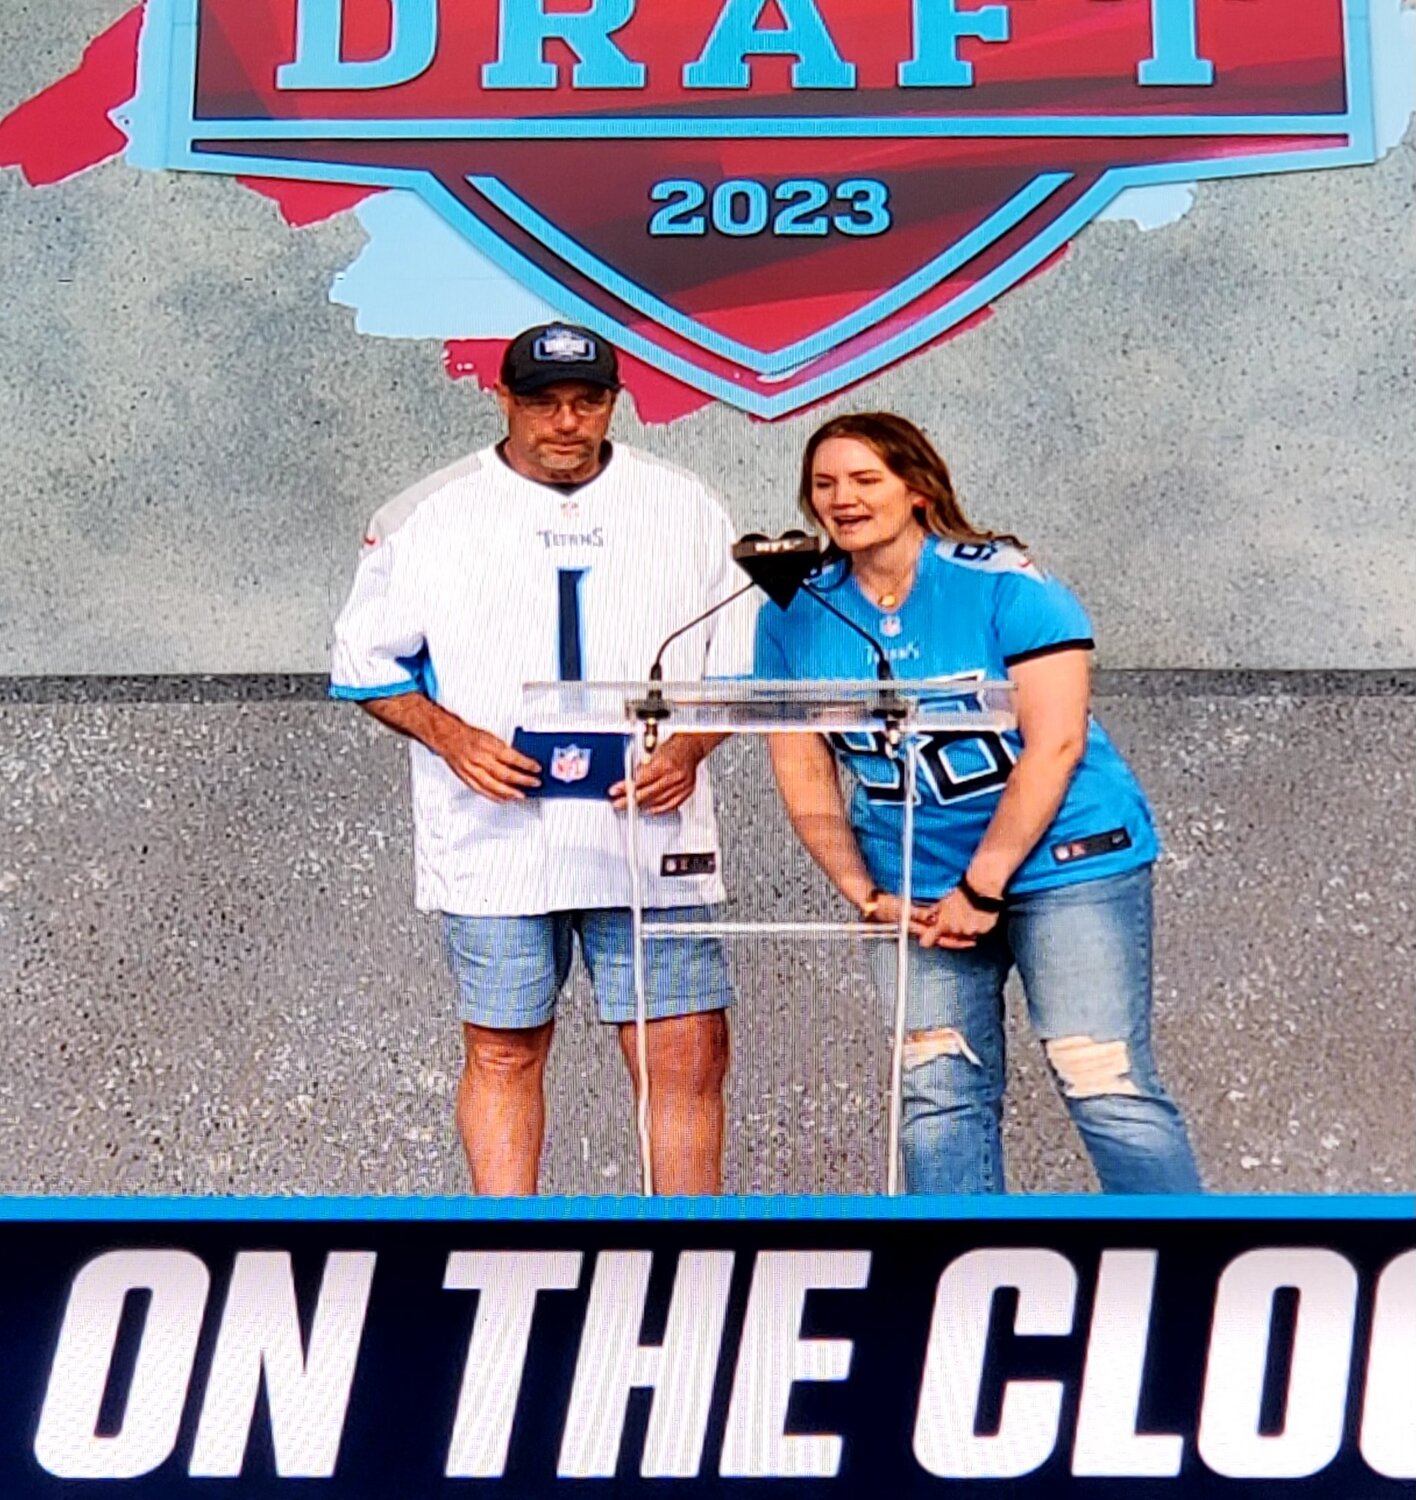 Local Titans fan and longtime season ticket holder, Scott Claxton, announces the Titans' sixth-round pick with Crystal Cole on Saturday. 